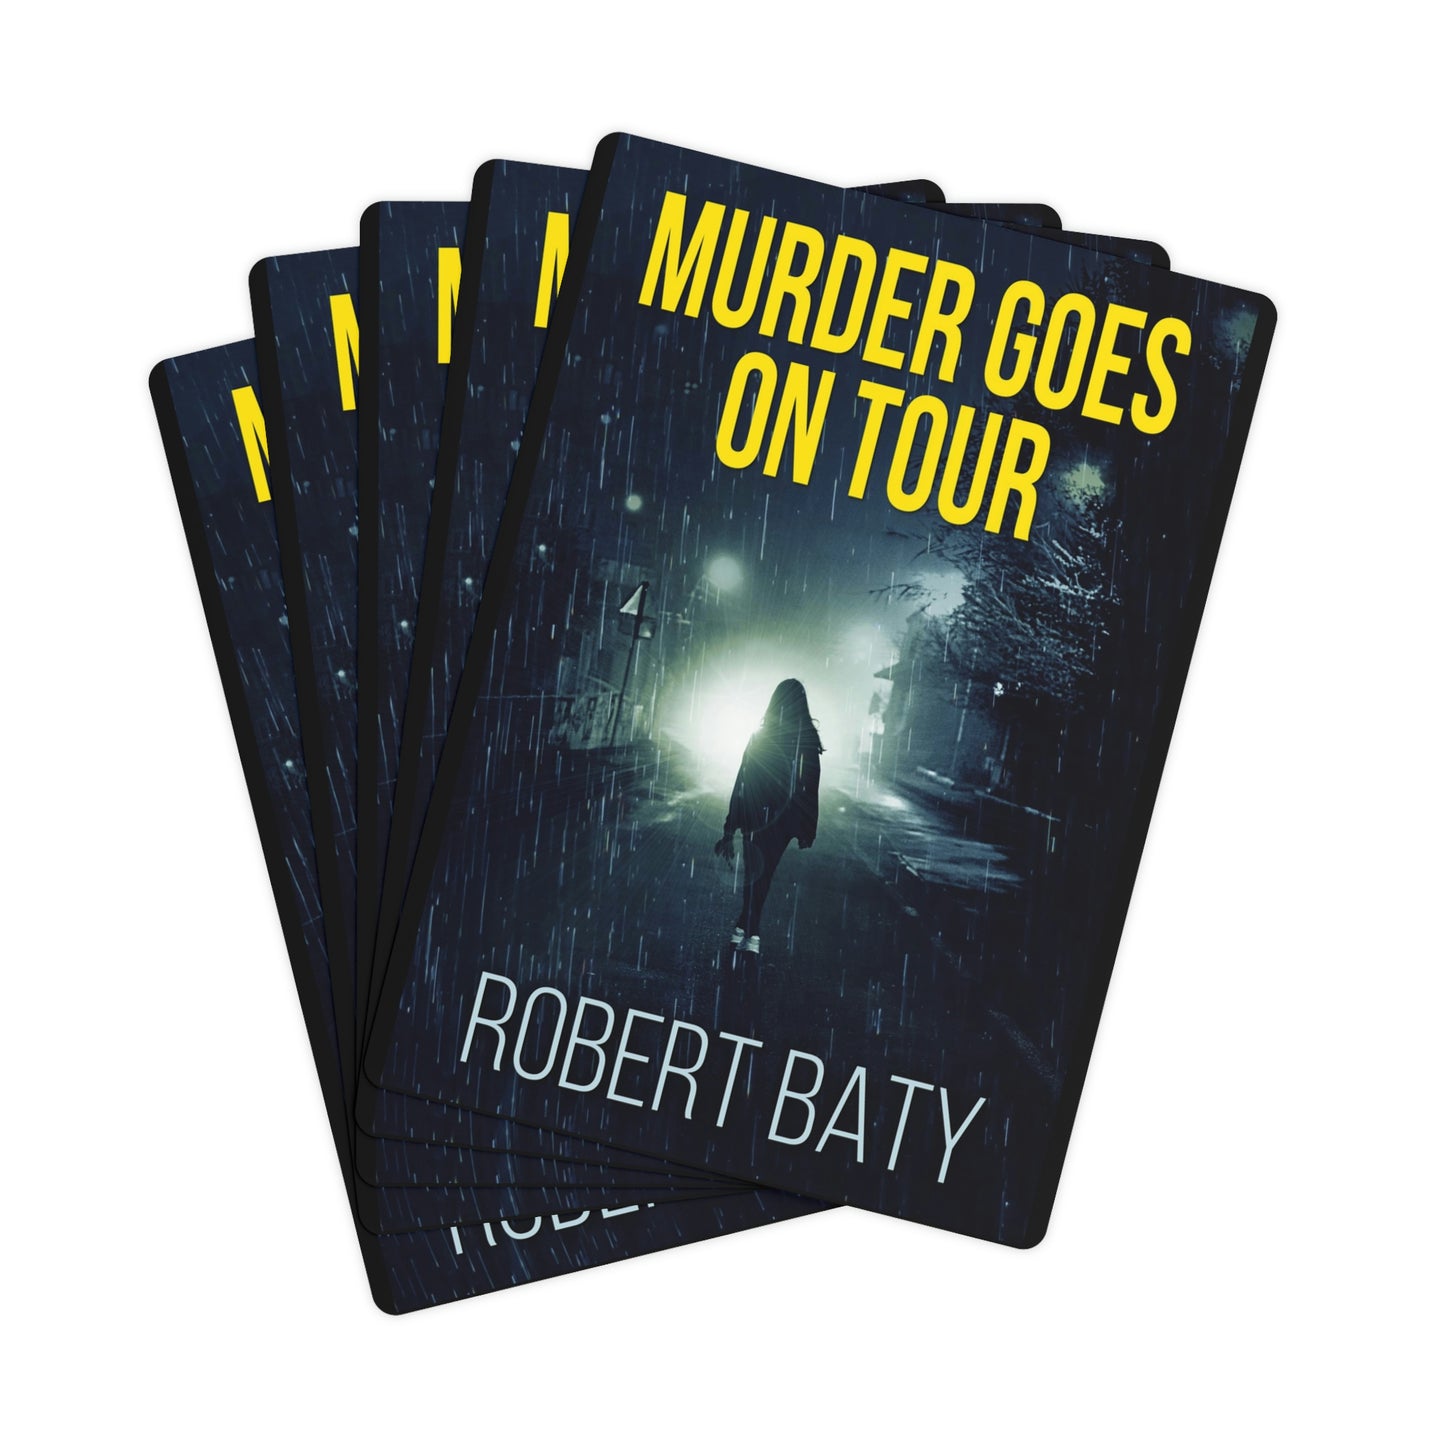 Murder Goes On Tour - Playing Cards